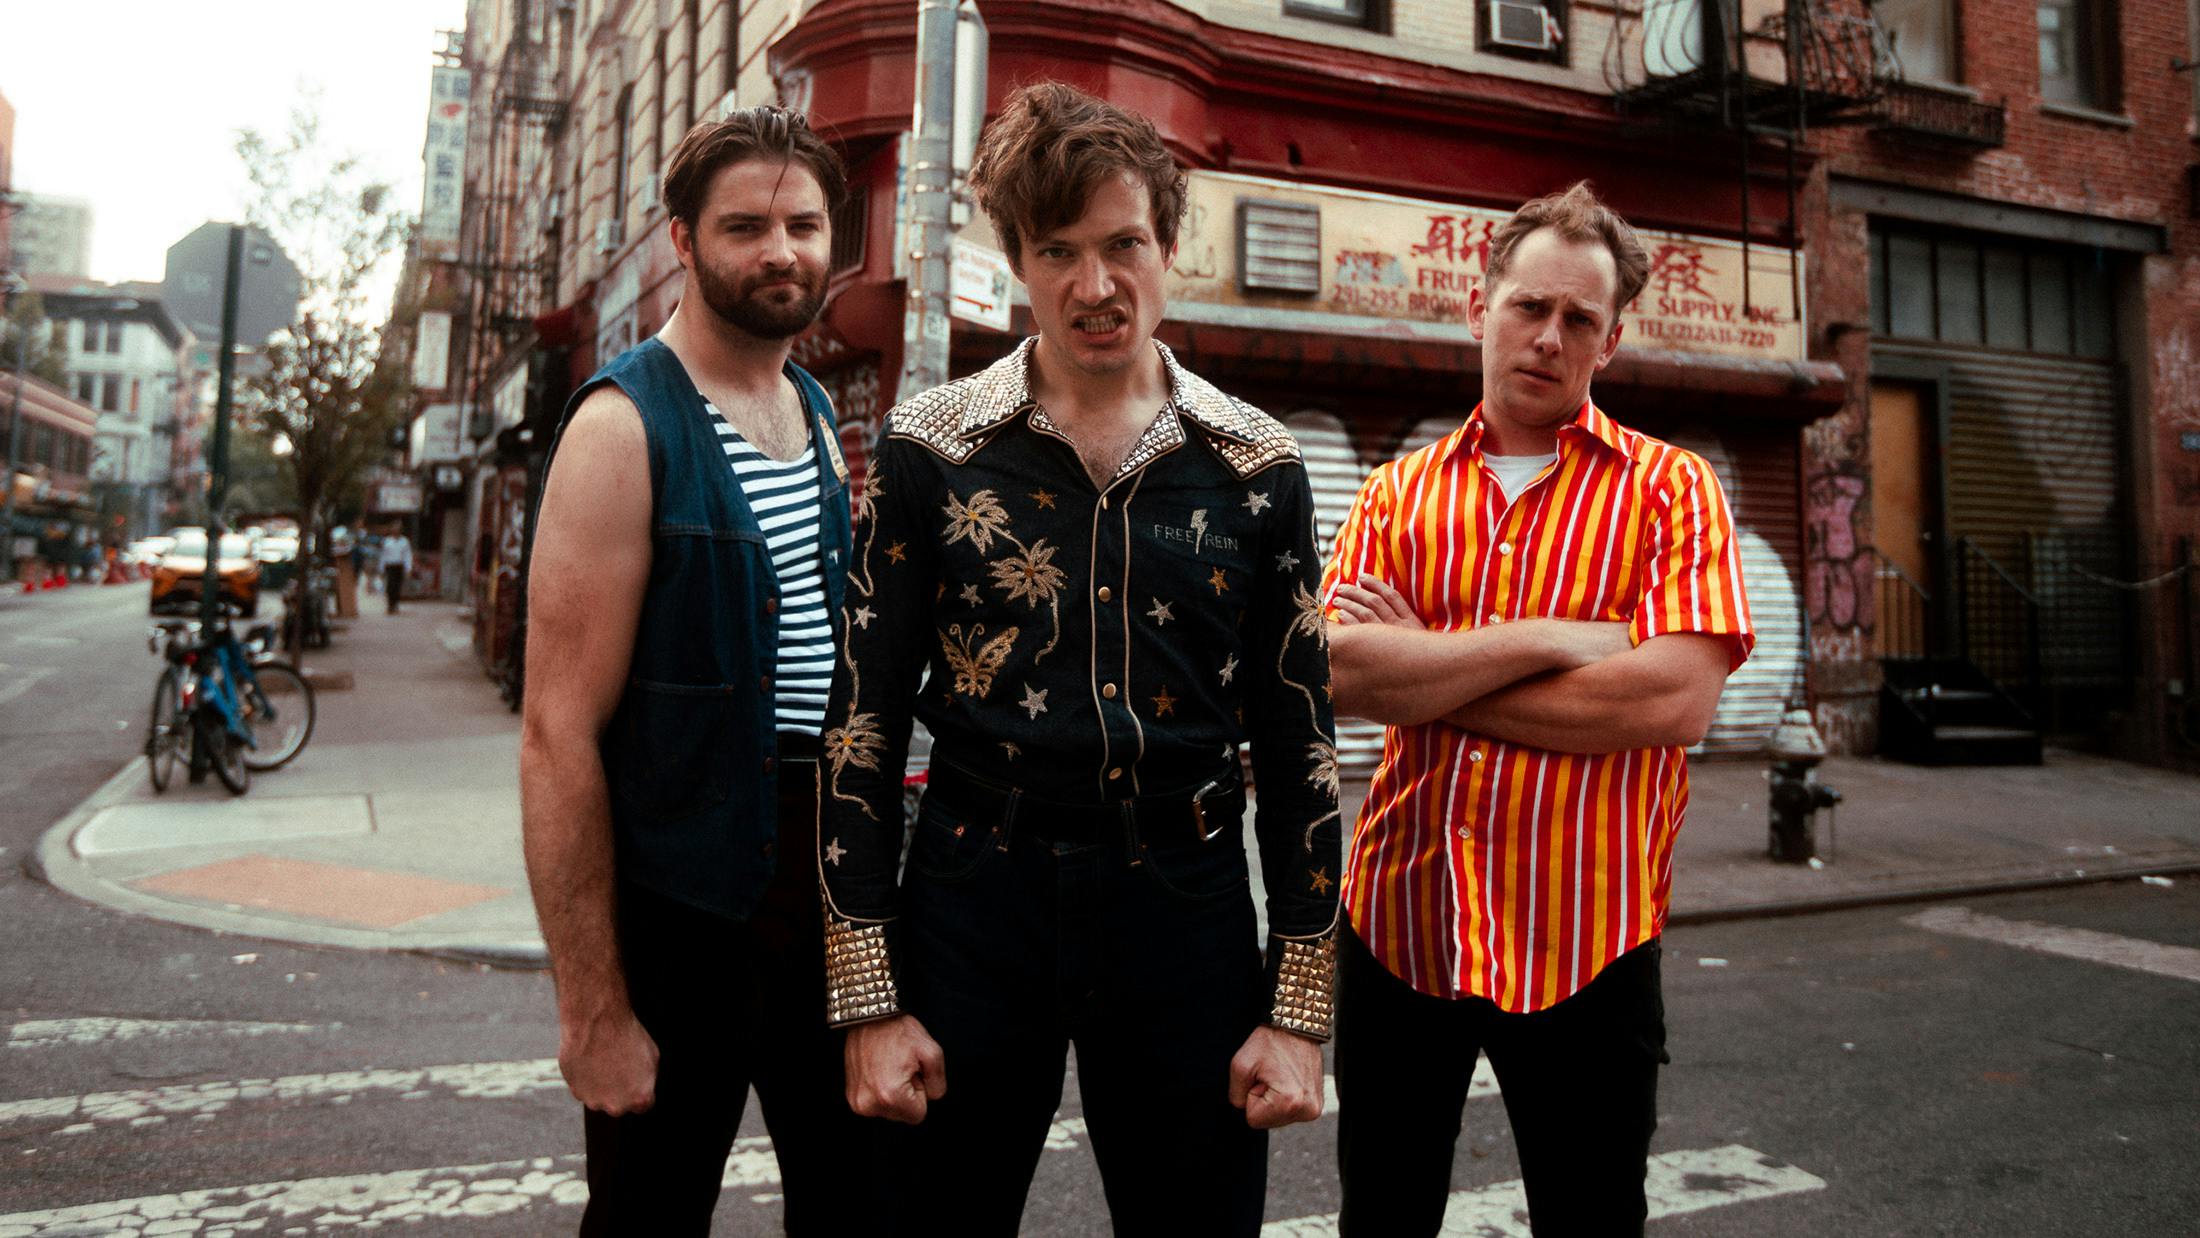 Listen to The Dirty Nil’s playlist curated for this week’s Cover Story